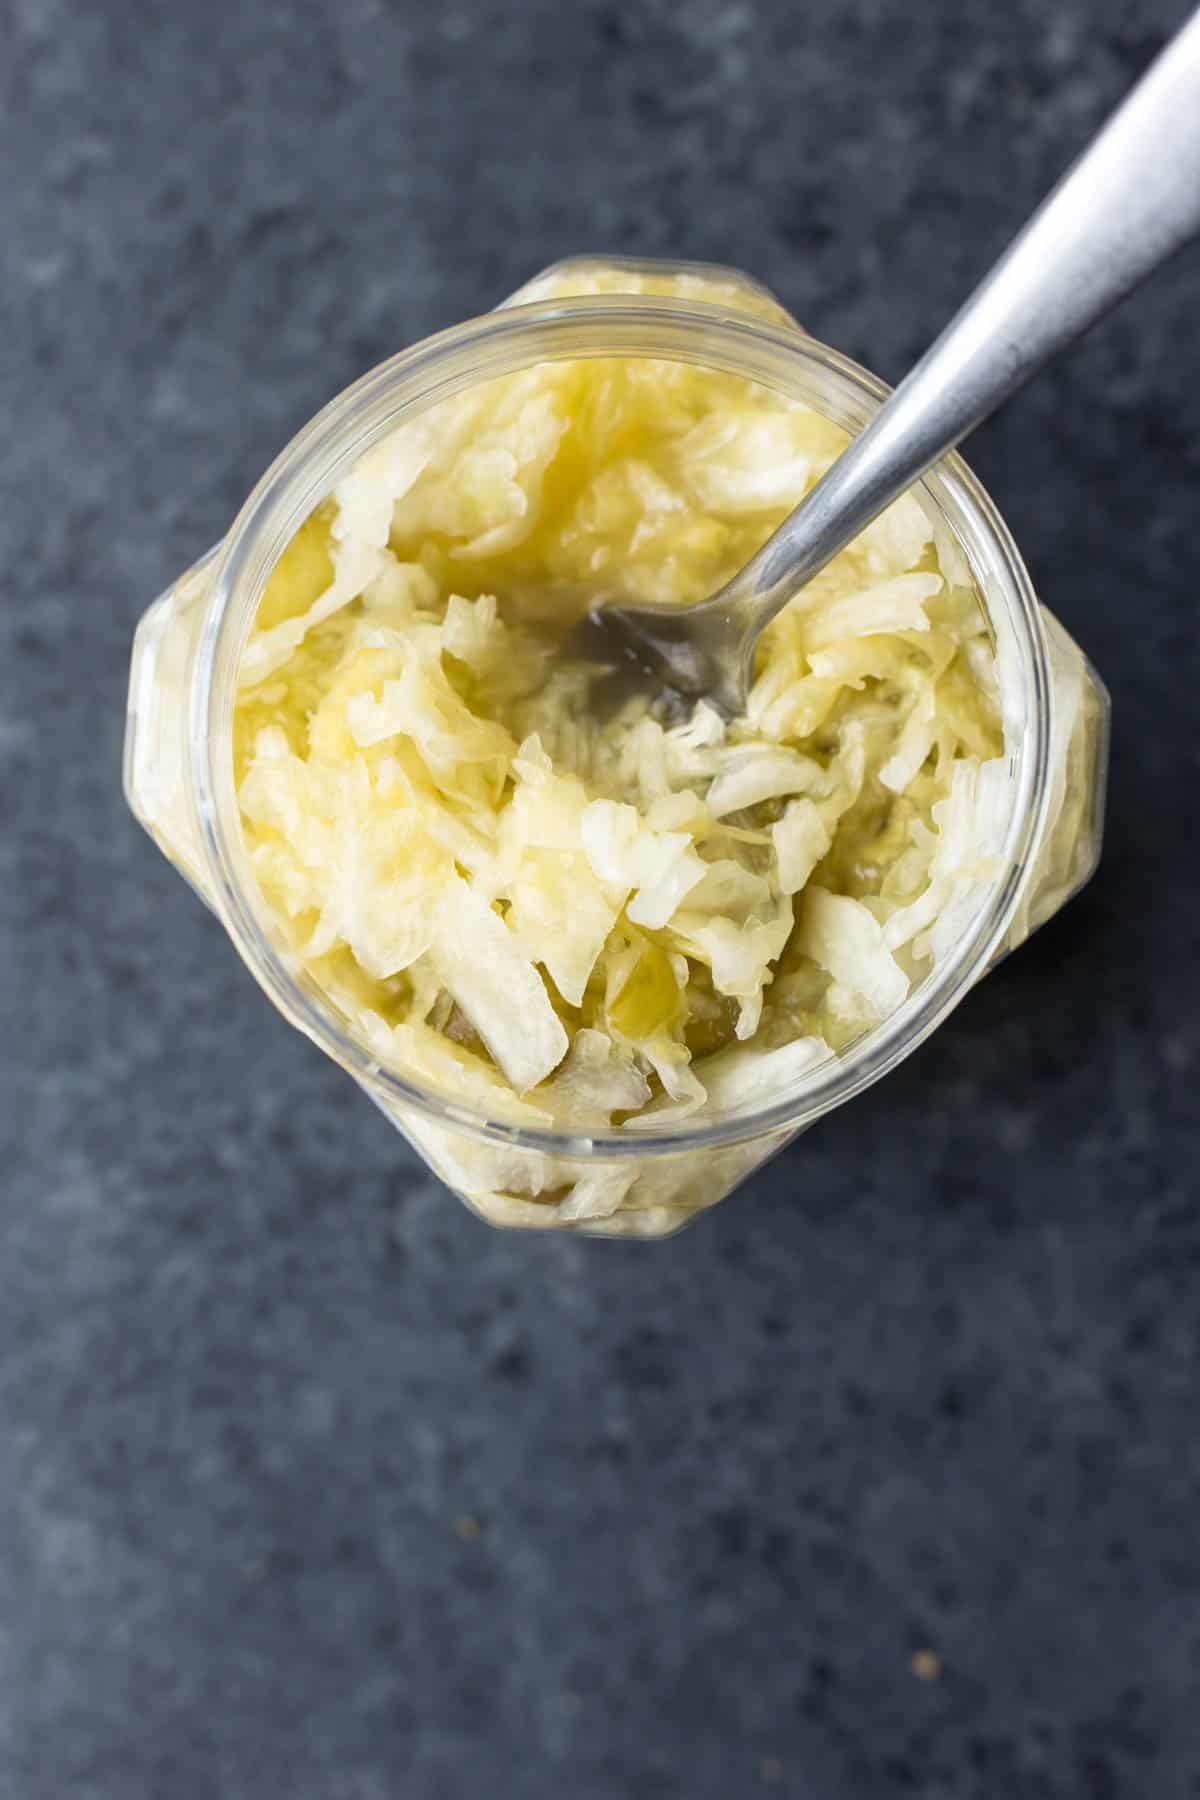 a jar of sauerkraut with a spoon in it